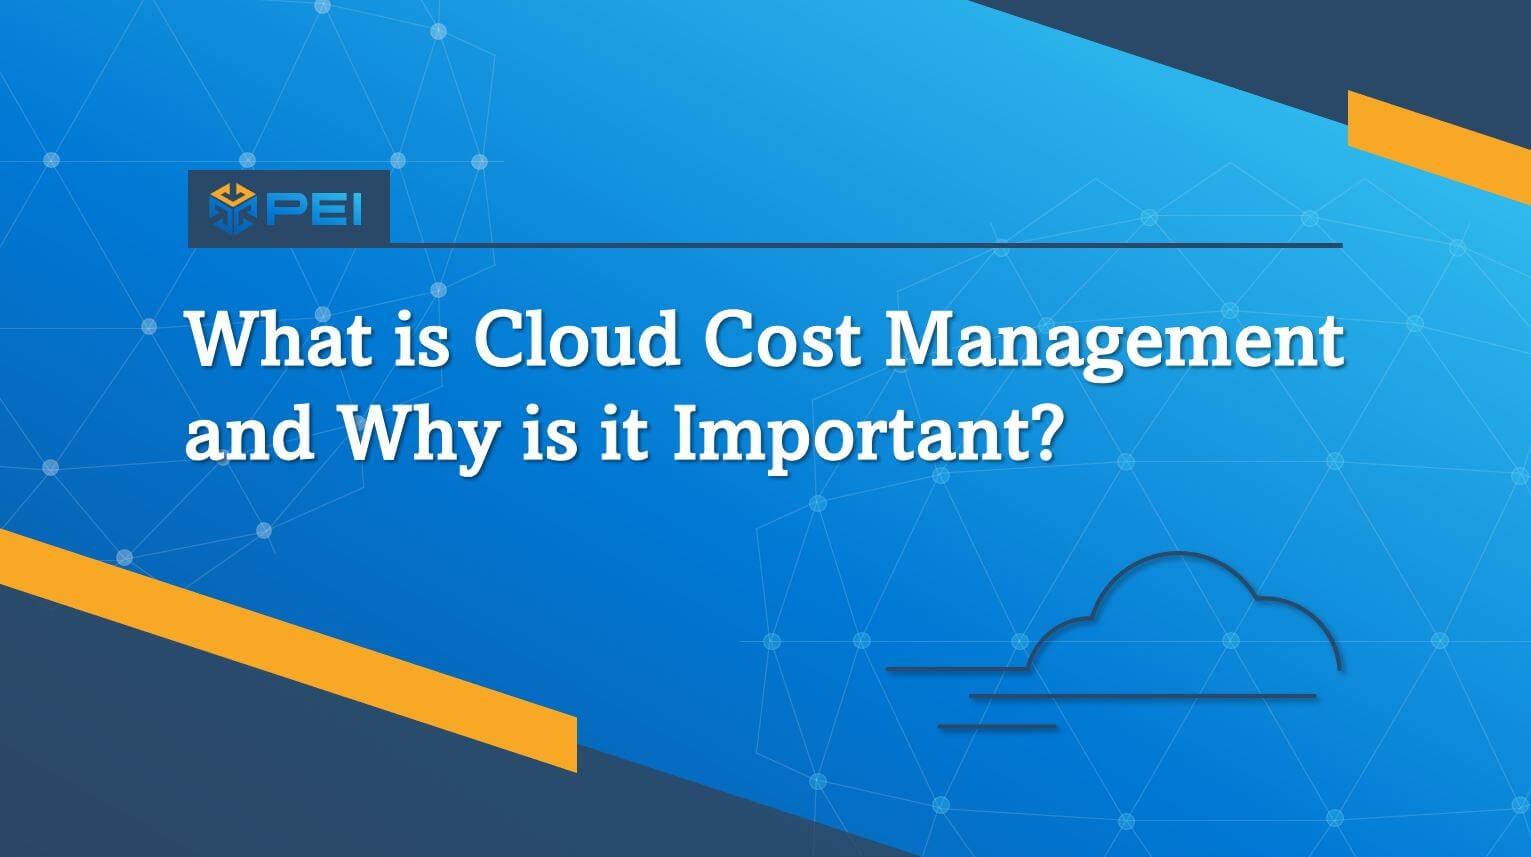 "What is Cloud Cost Management and Why is it Important?" blue background